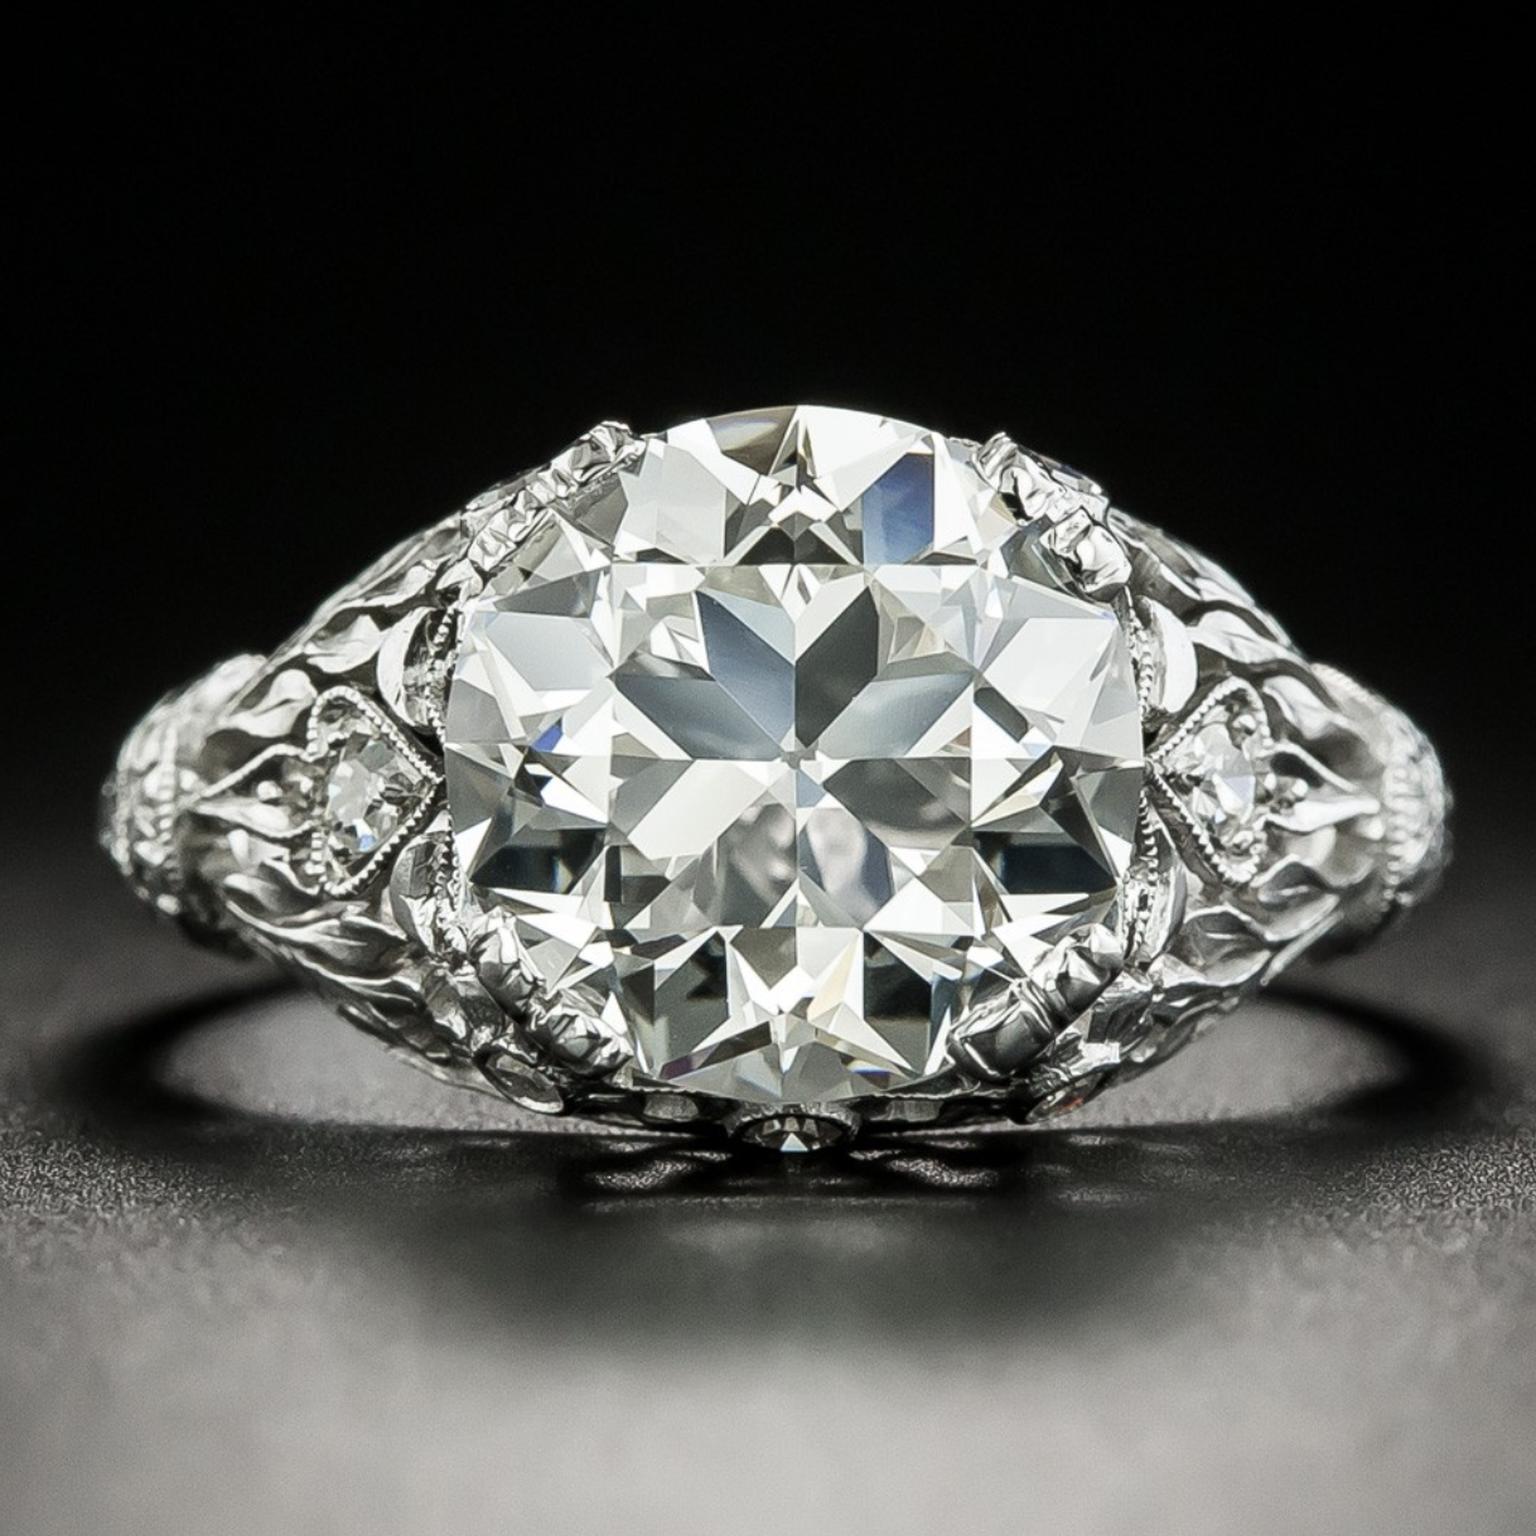 TIFFANY & CO. EARLY-ART DECO ENGAGEMENT RING 